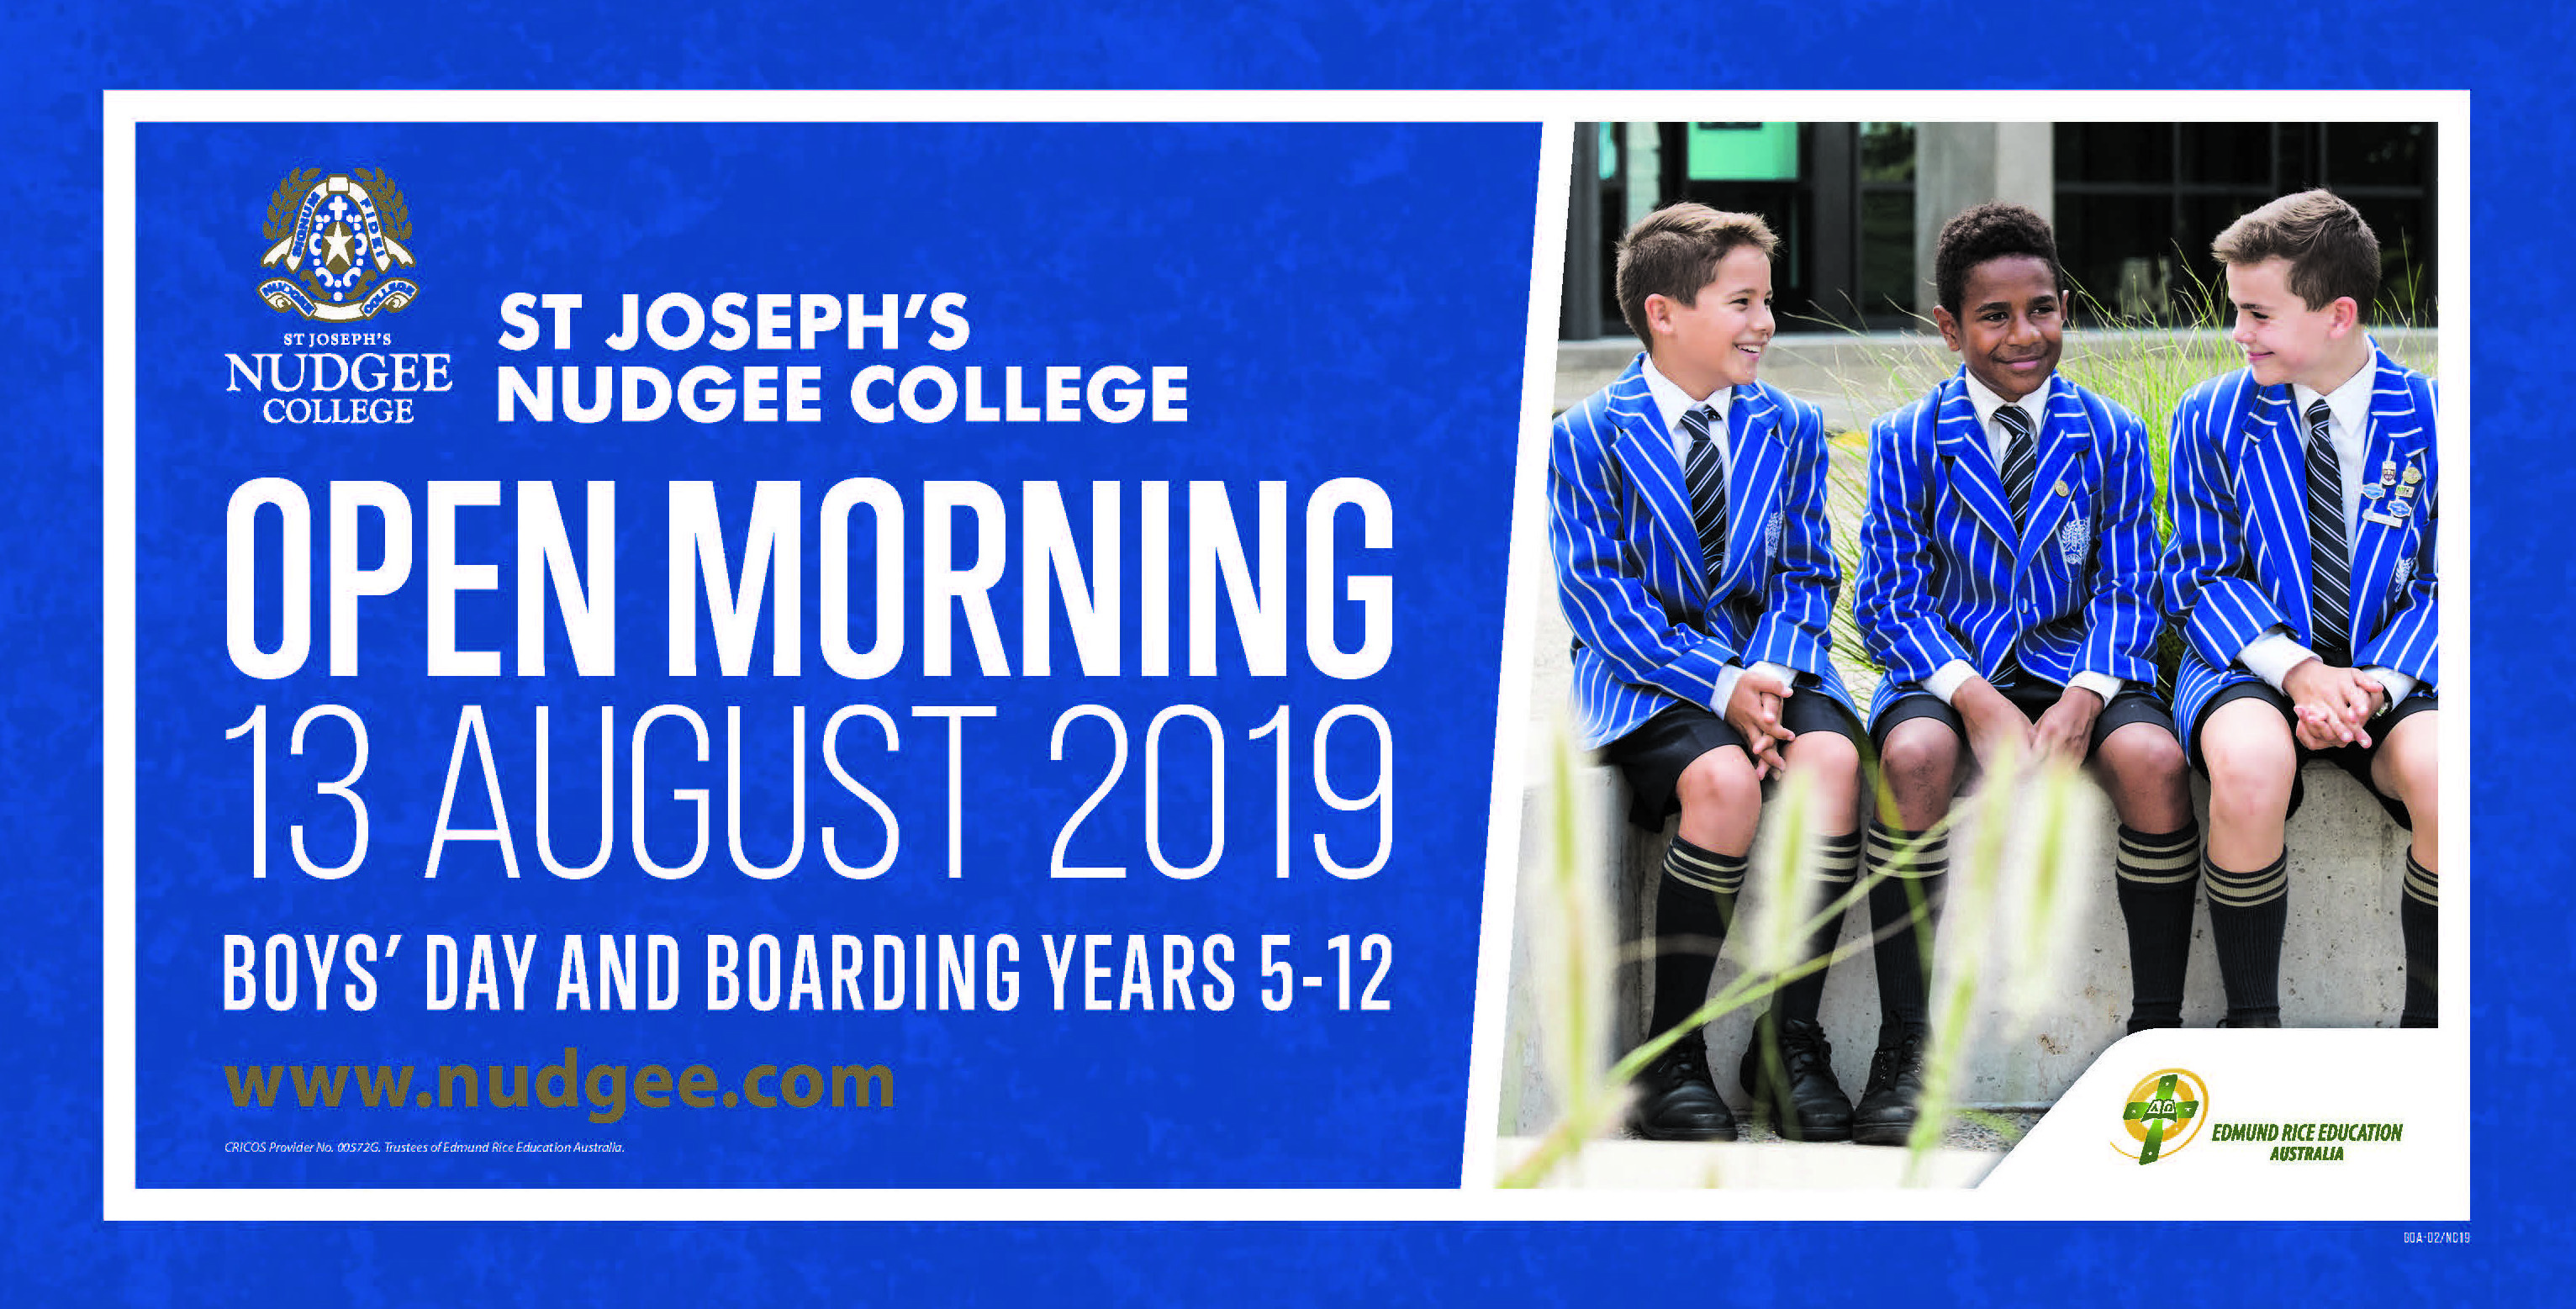 Nudgee-College-Open-Morning-2019.jpg